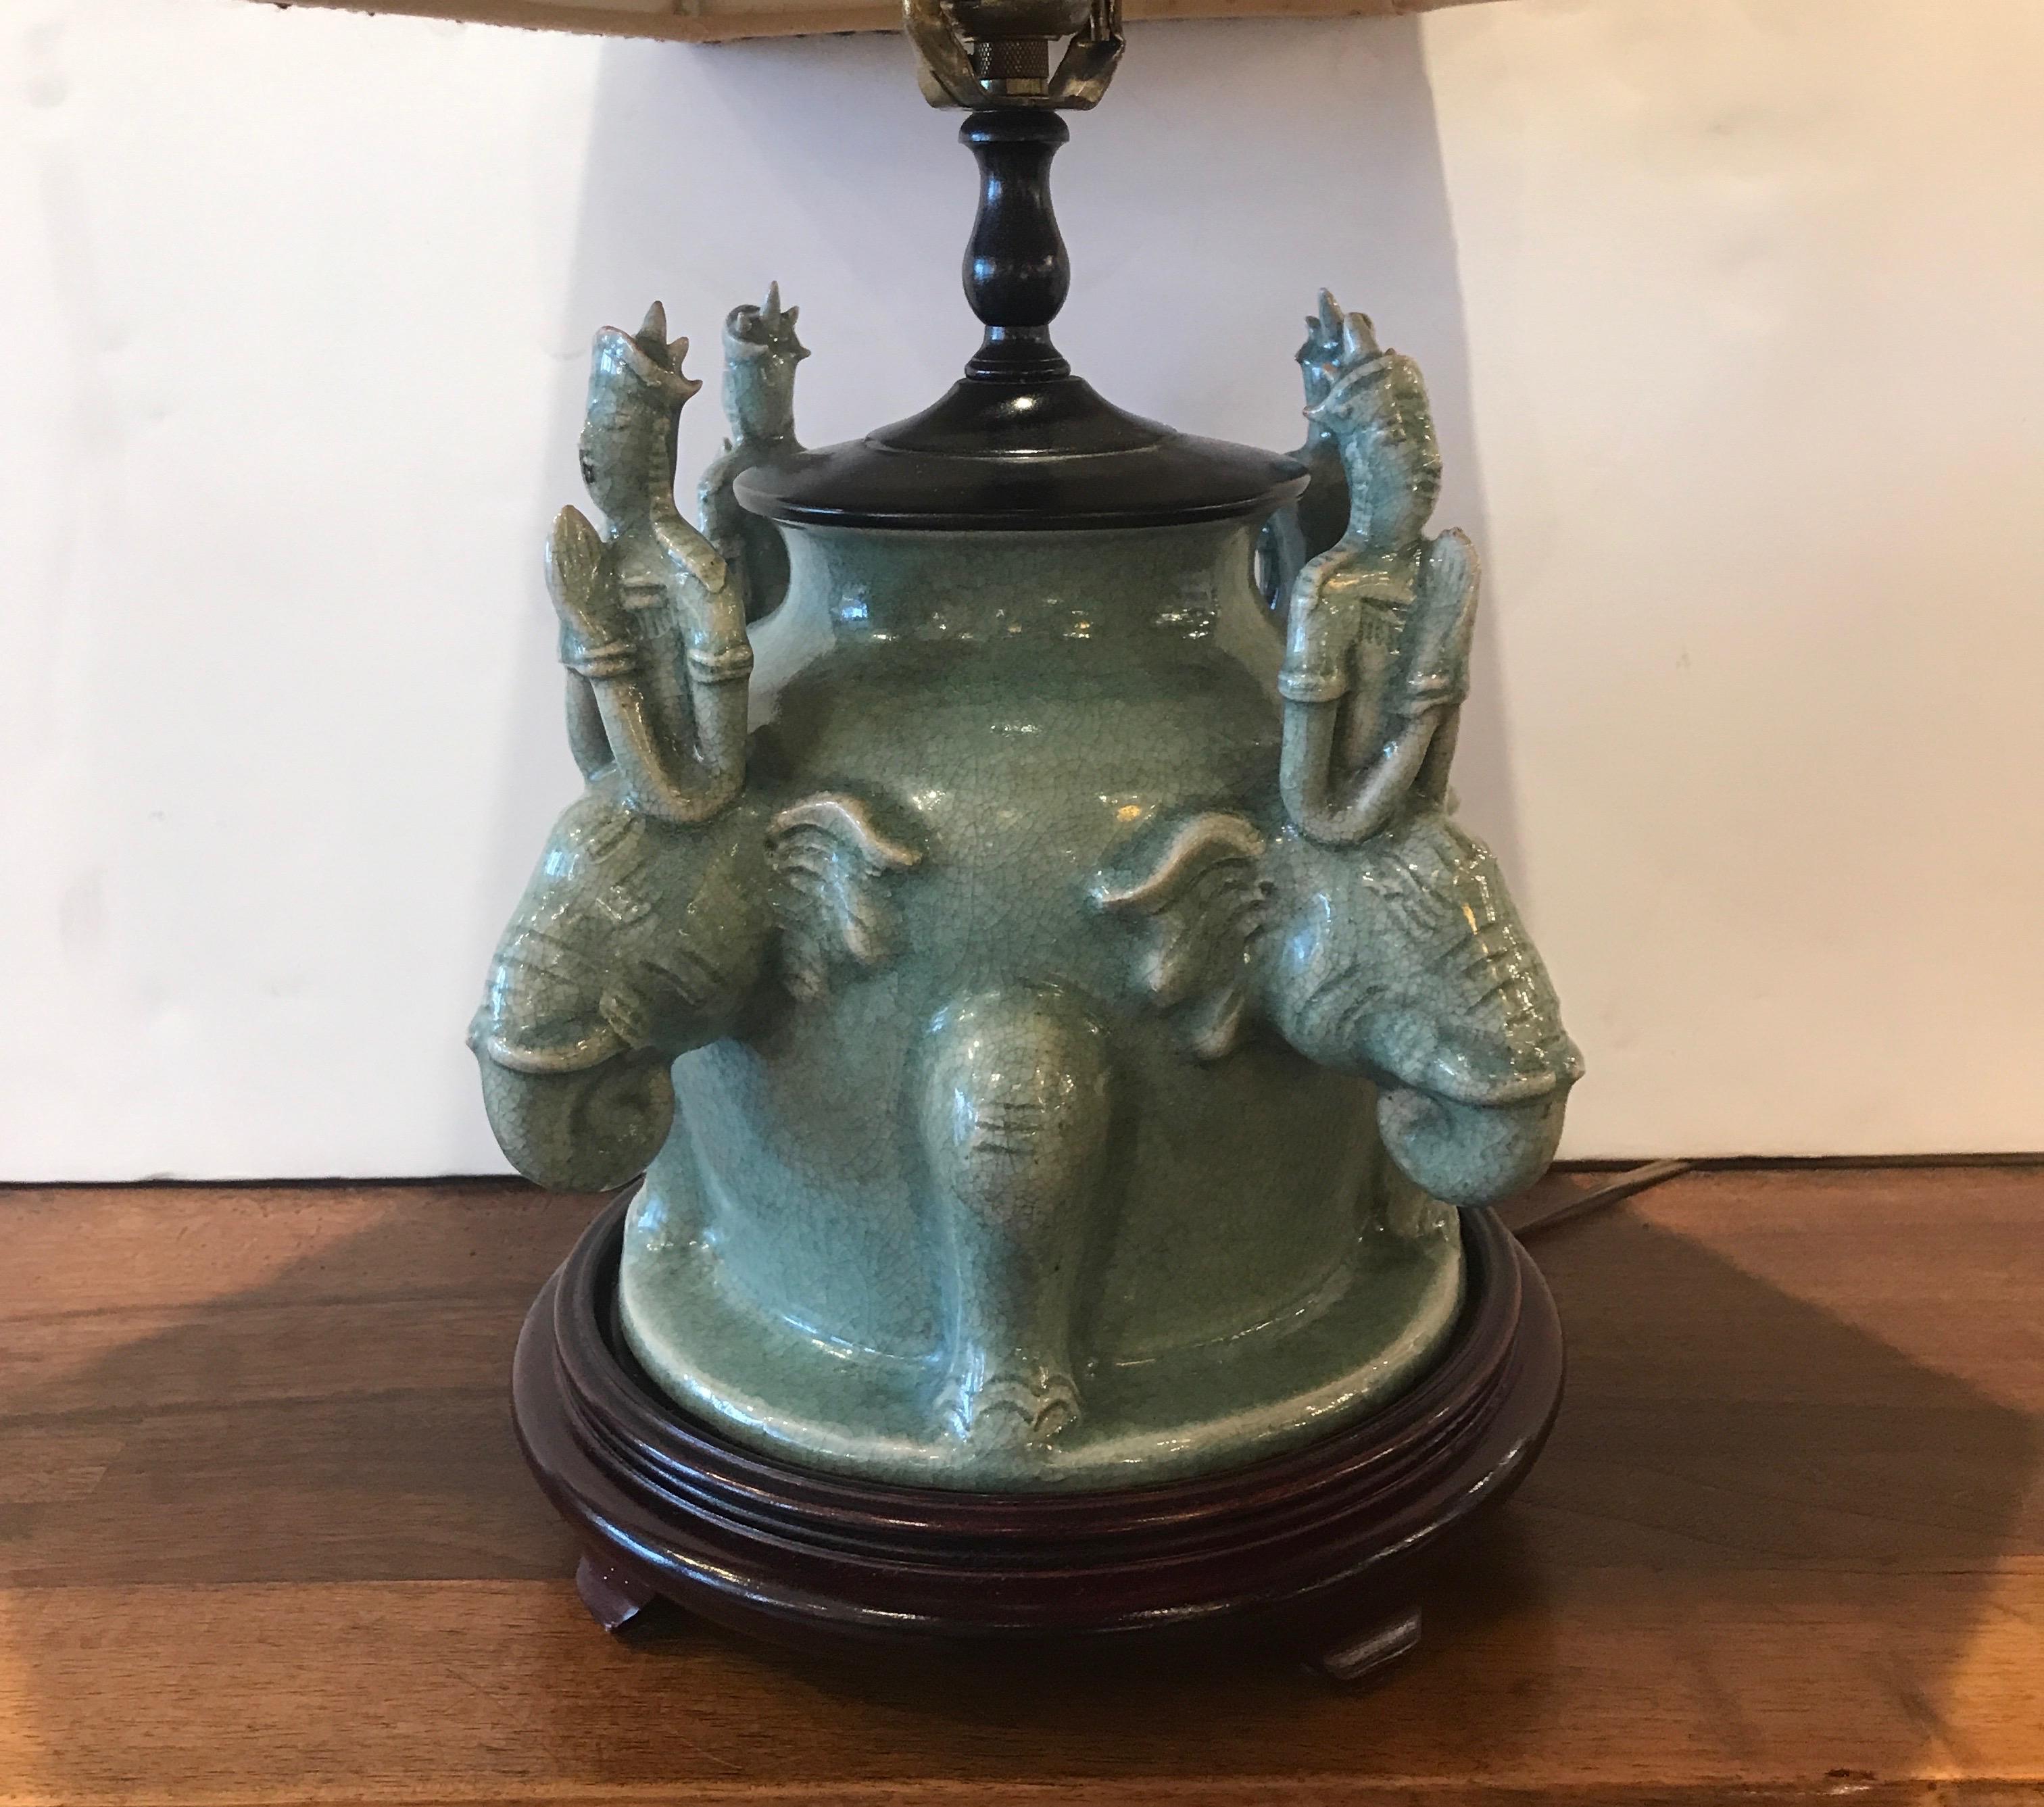 Chinese celedon porcelain lamp with custom shade. The porcelain with four figures of deity and elephant resting on a hardwood base. The shade custom made patterned silk with a jade color stone finial. Very chic decorator style. The base is 9 inches